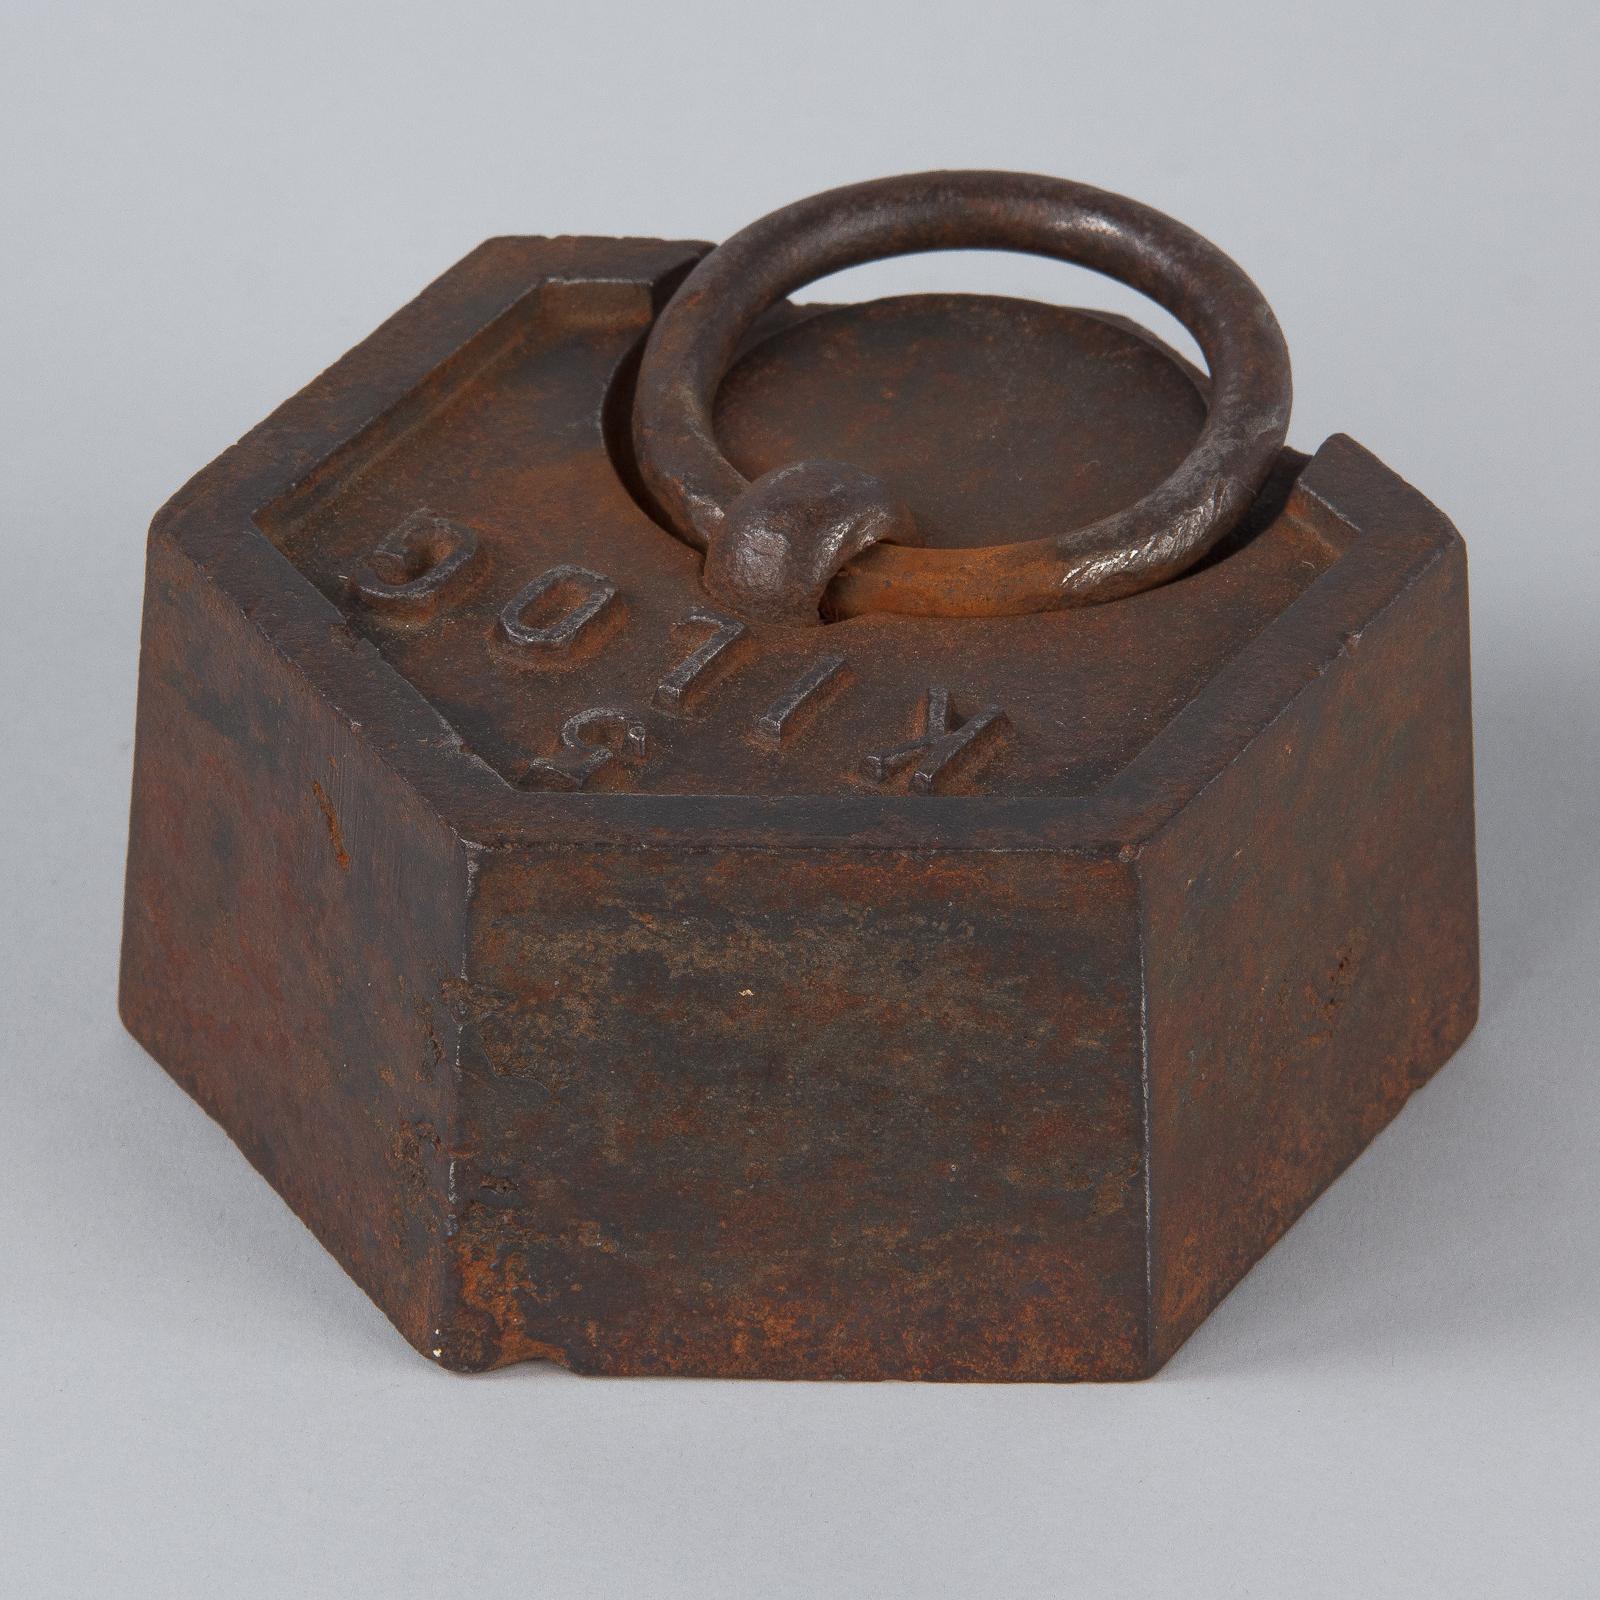 5 Kilogram Iron Scale Weight, France, Early 1900s 1